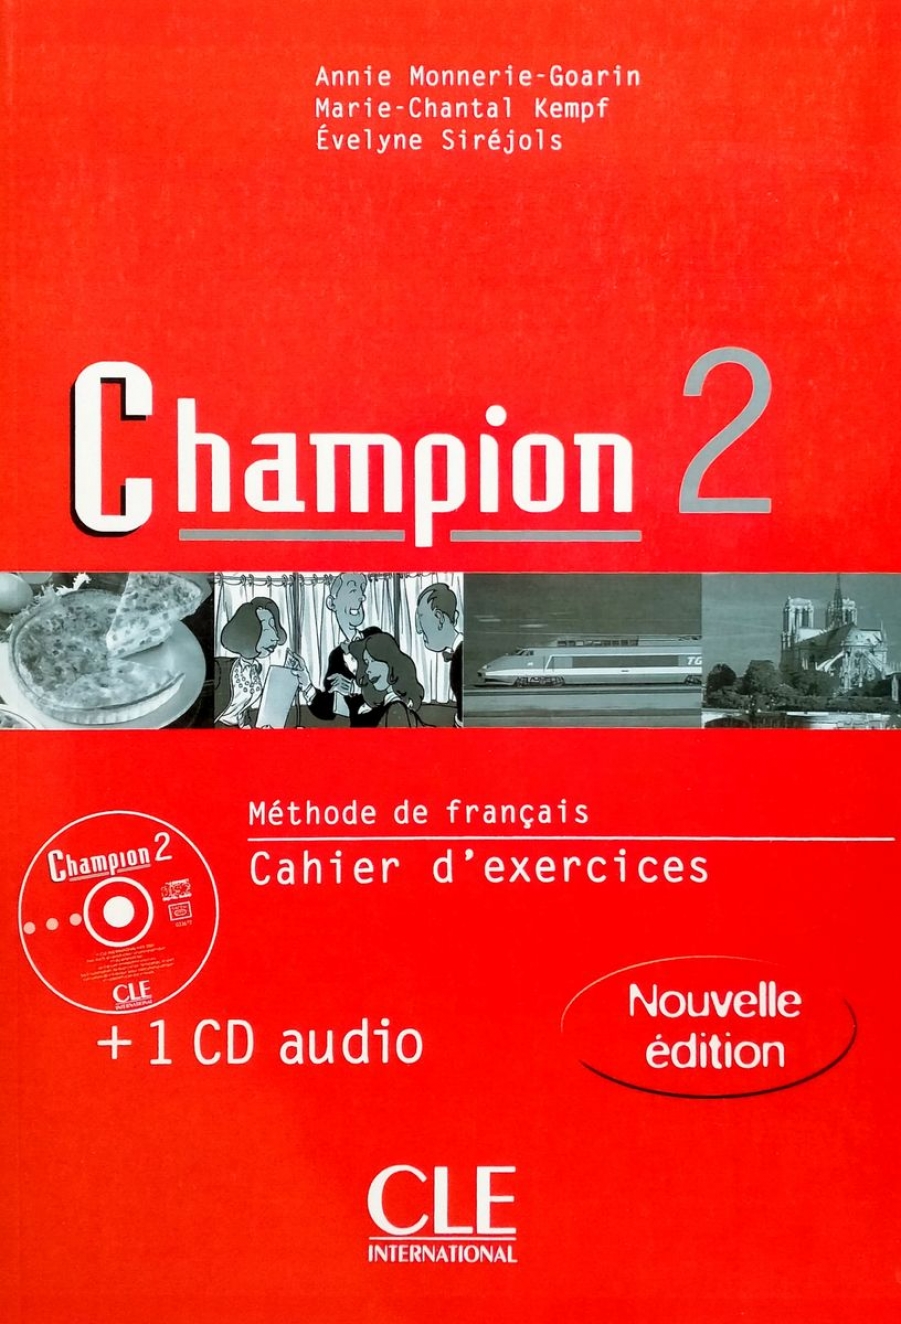 Annie M. Champion 2 Cahier d'exercices 